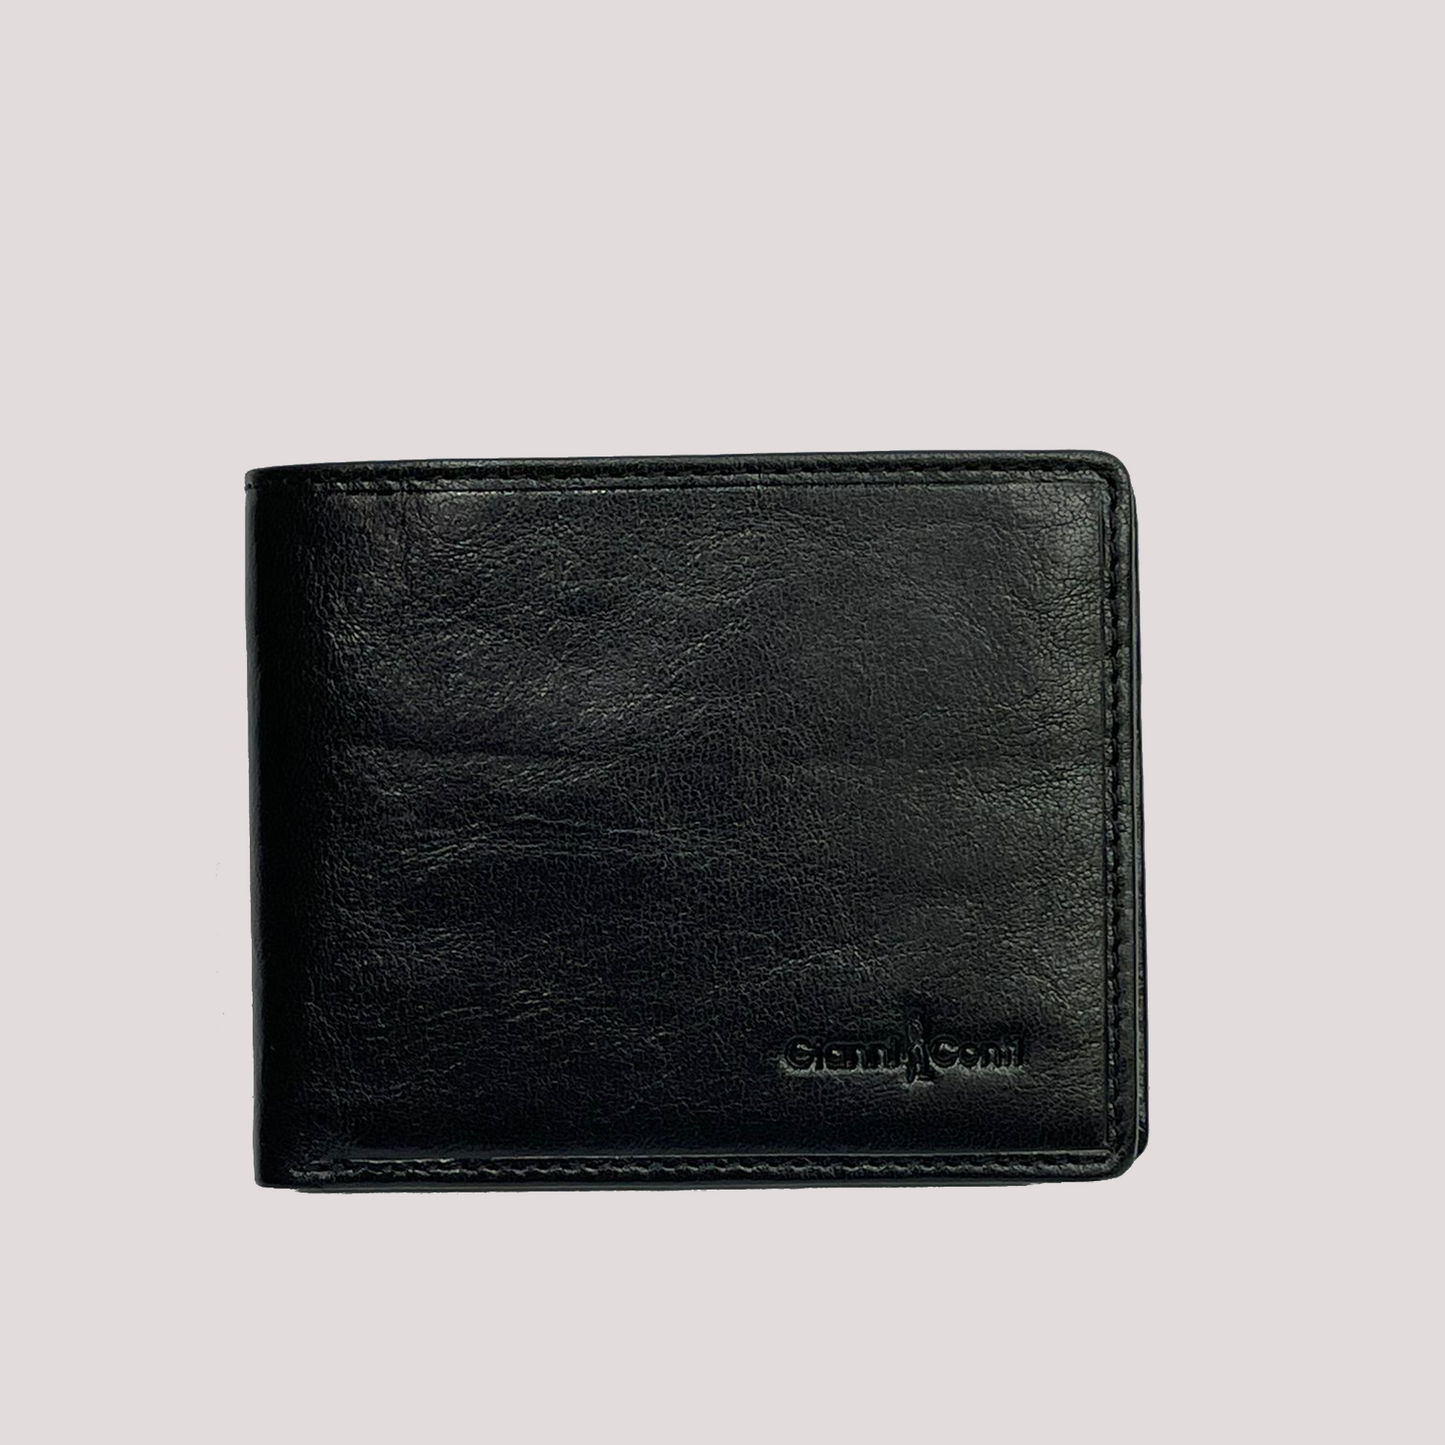 Gianni Conti Black Leather Wallet-8 credit card sections